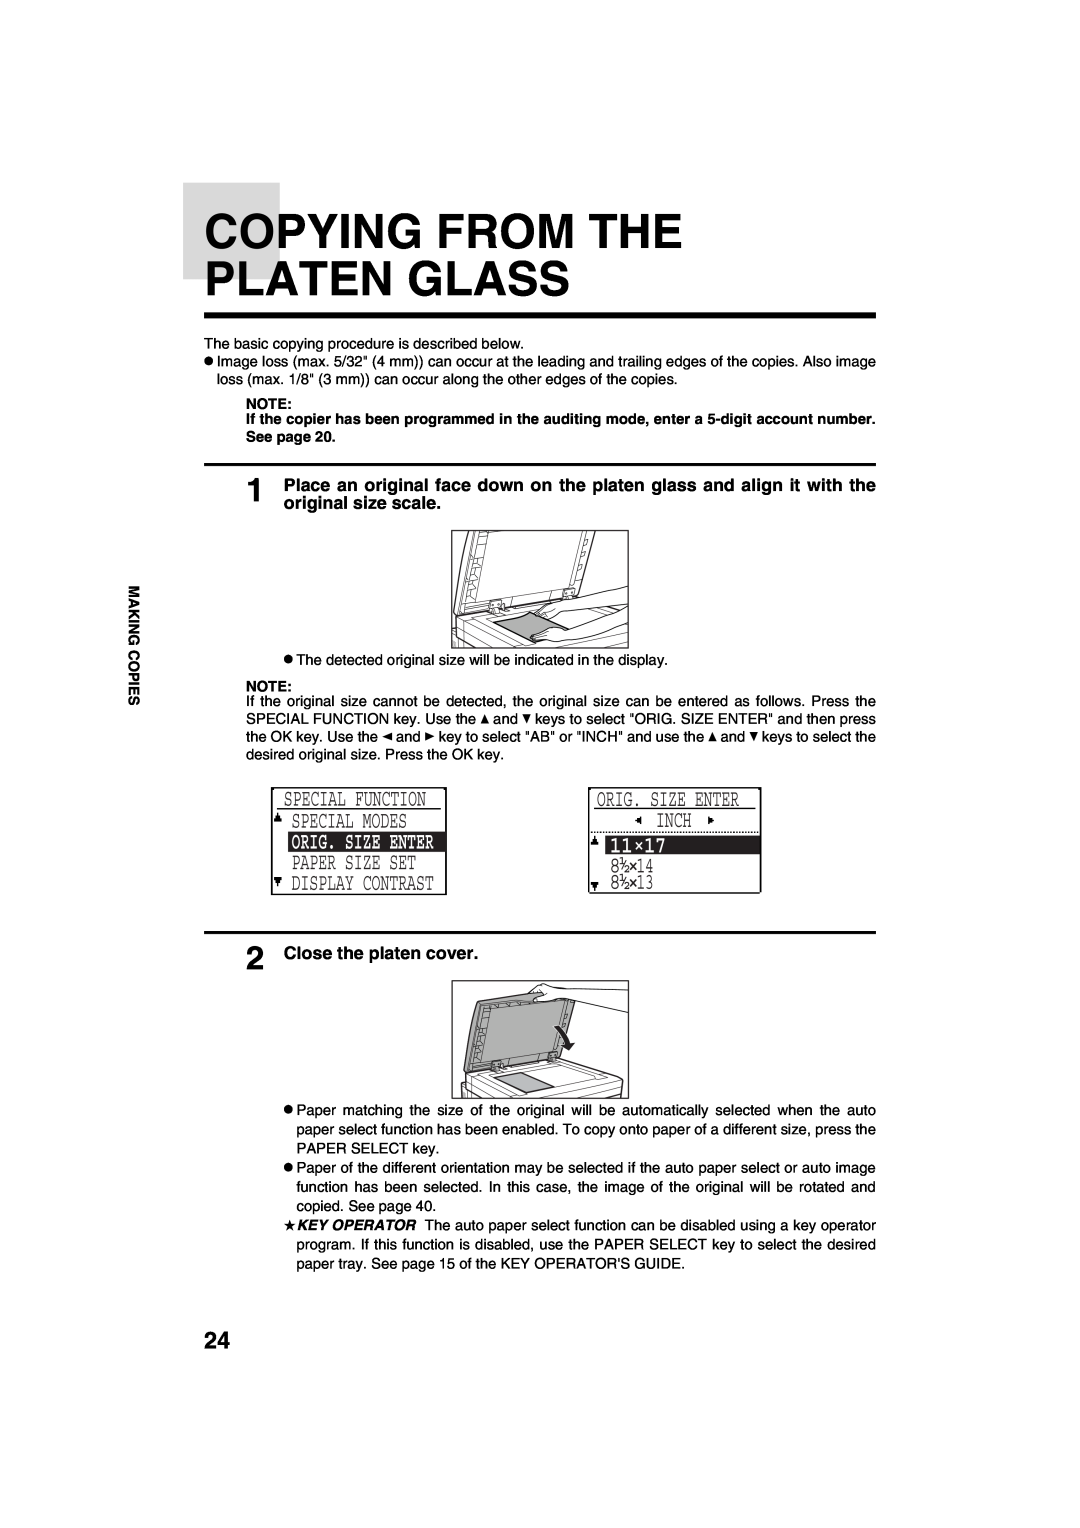 Sharp AR-M208 Copying From The Platen Glass, Inch, Special Modes, original size scale, Close the platen cover 